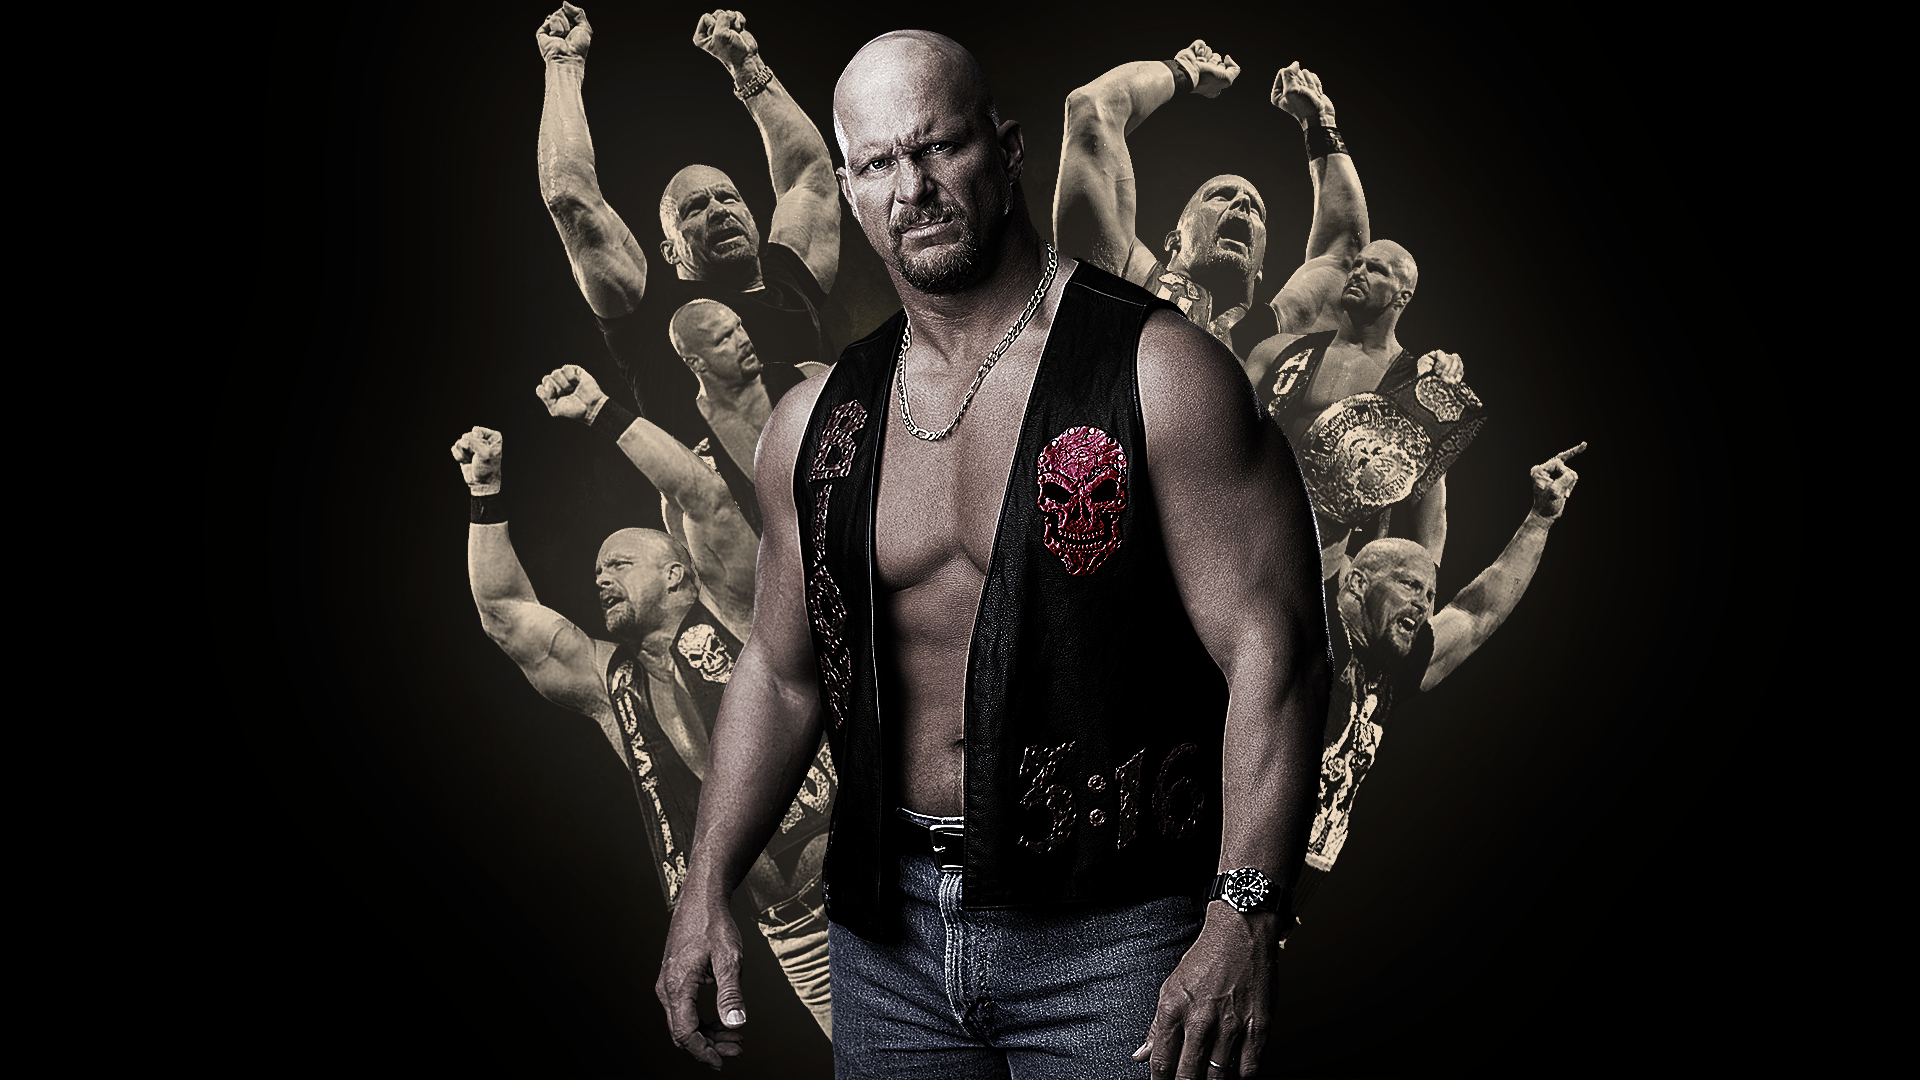 1920x1080 Stone Cold Steve Austin by RatedEdgeSuperstar on deviantART | Stone cold steve, Steve austin, Wwe pictures